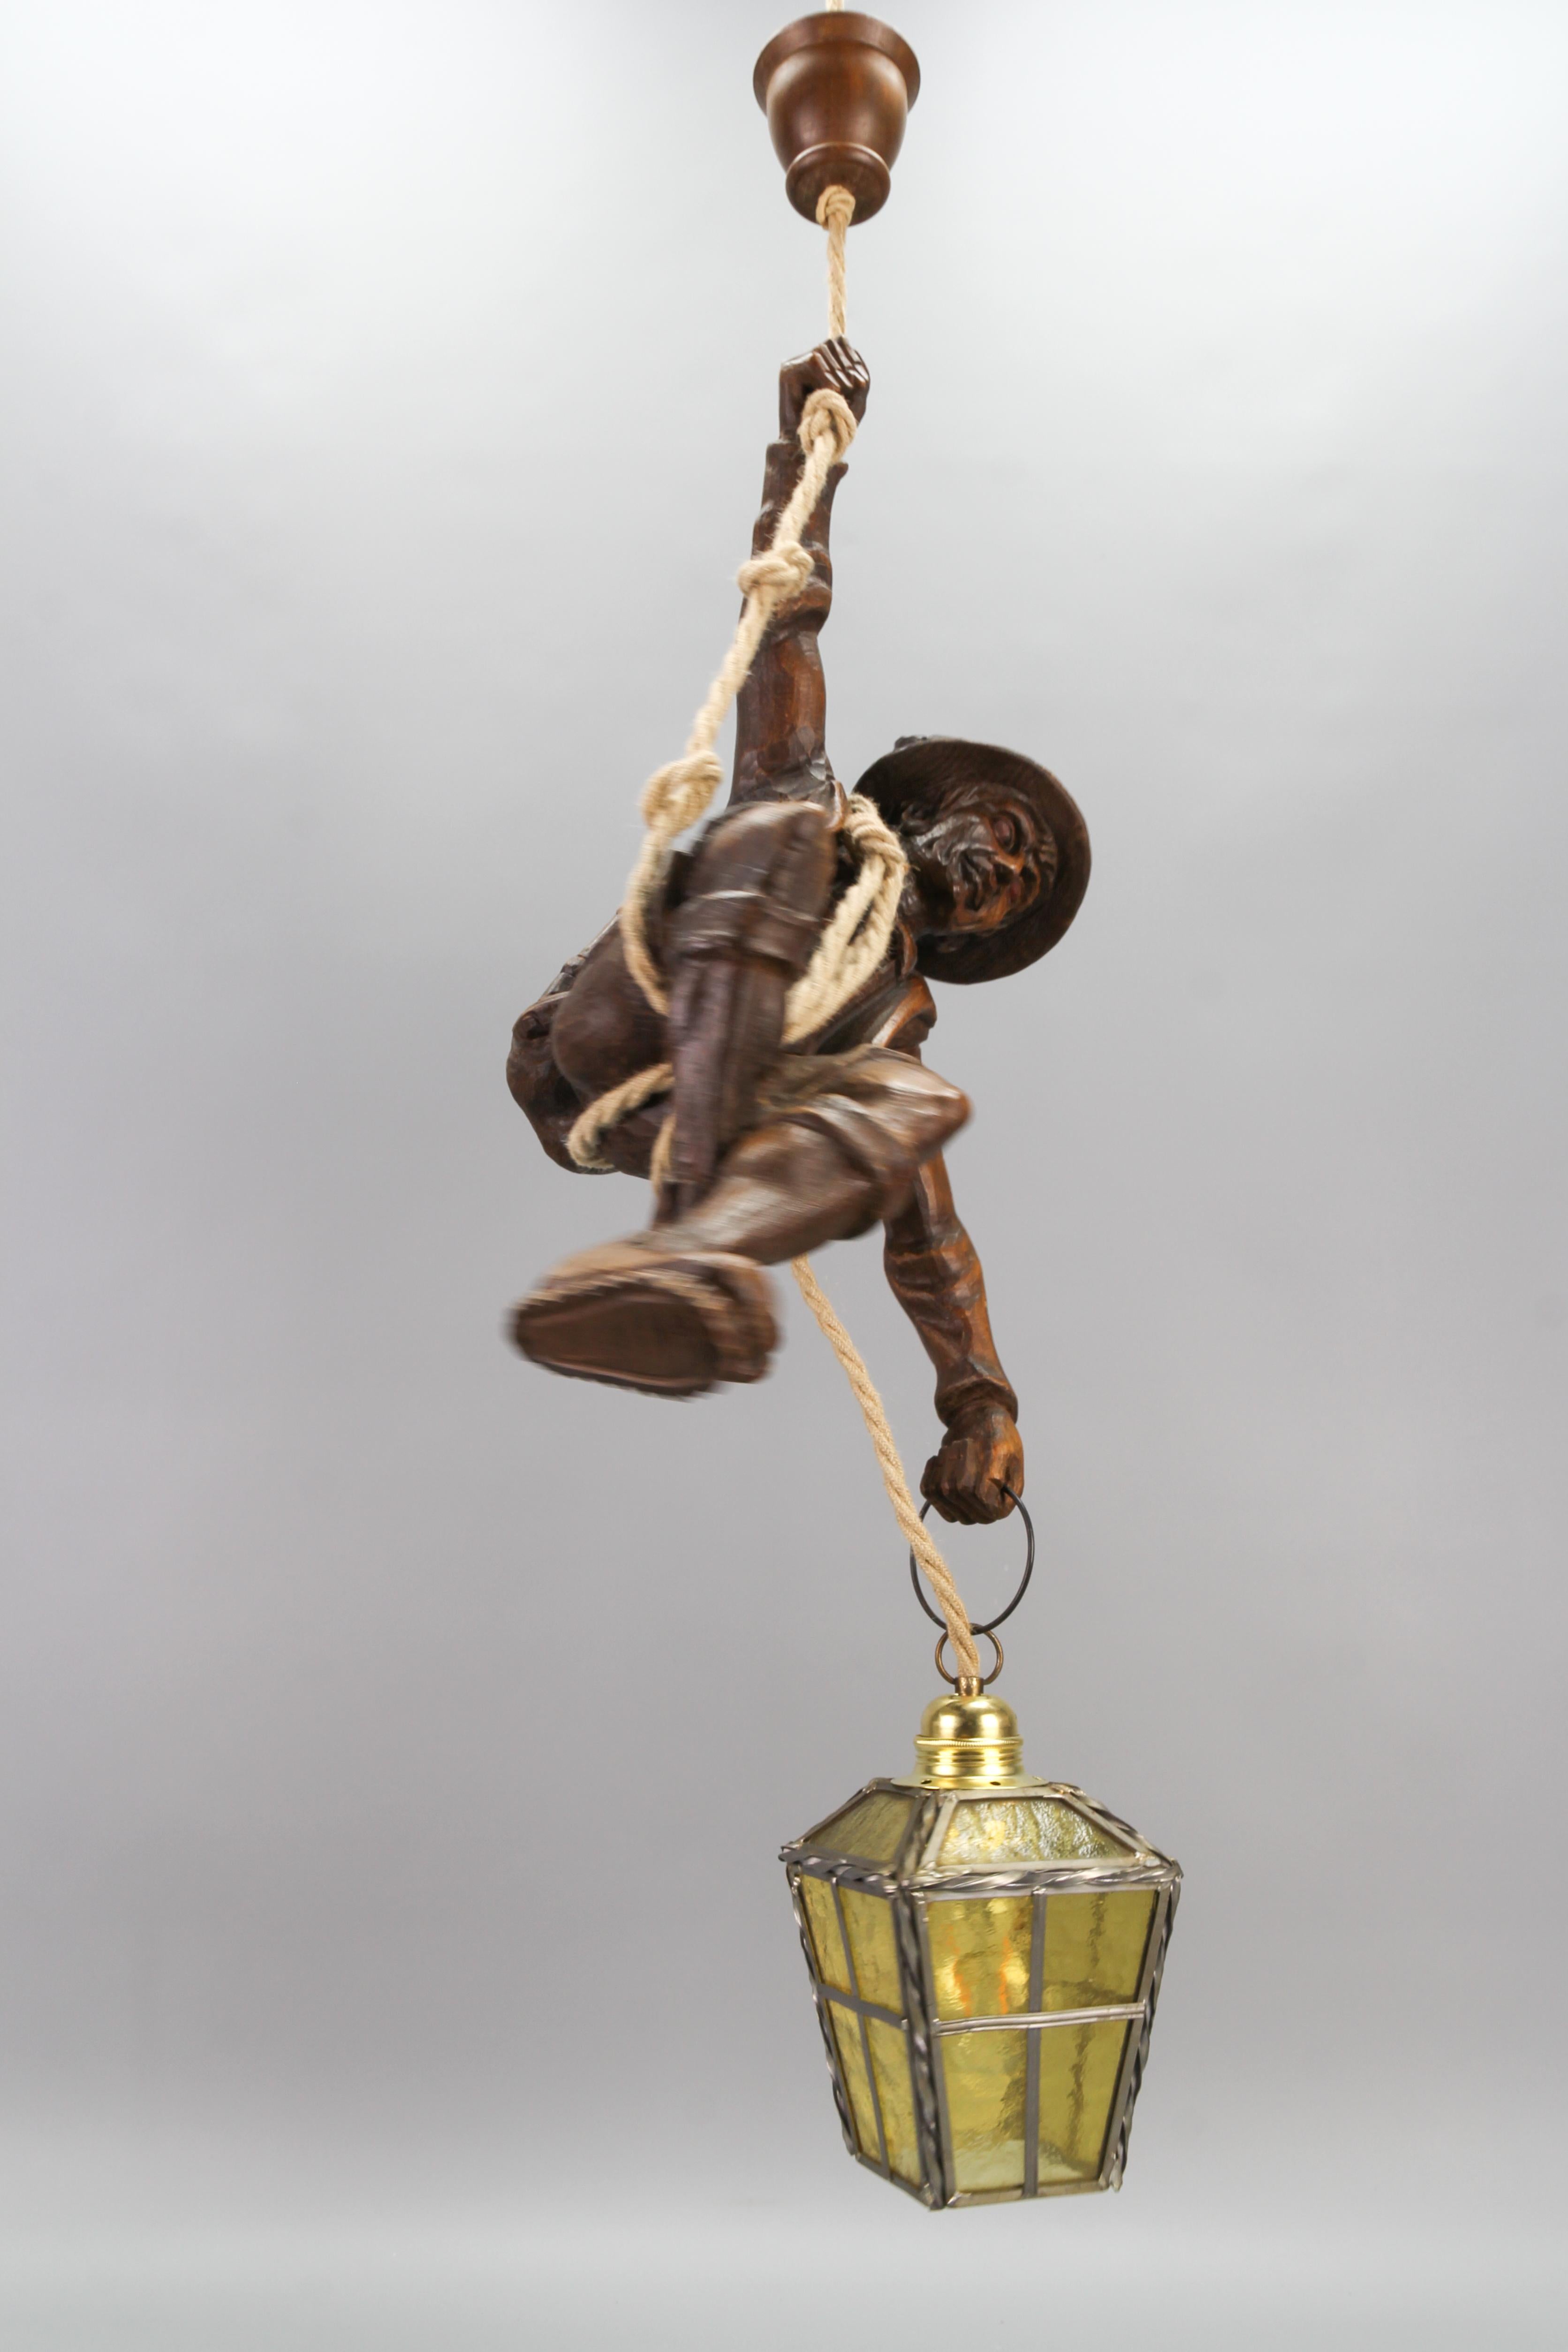 Wood Large Pendant Light Fixture with Carved Climber Figure and Lantern, Germany For Sale